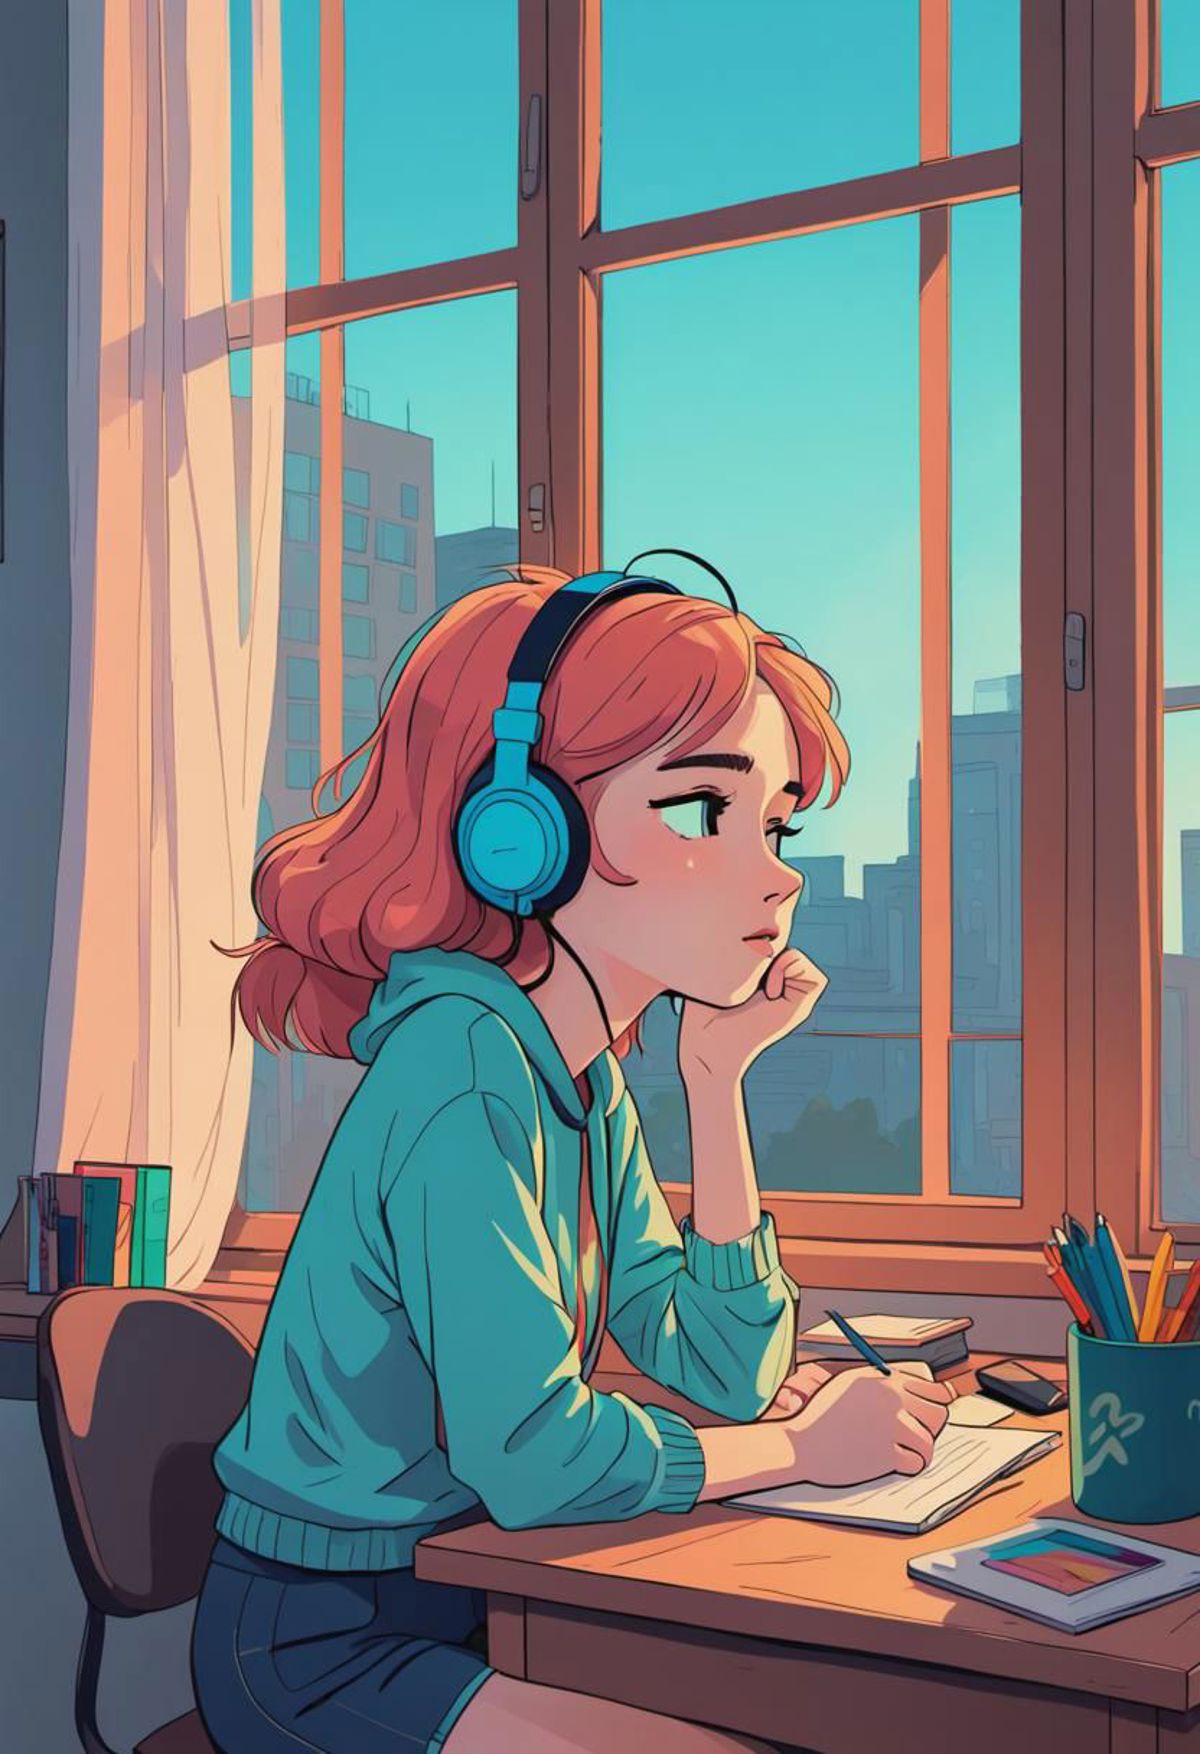 A girl wearing headphones and listening to music while writing at a desk.